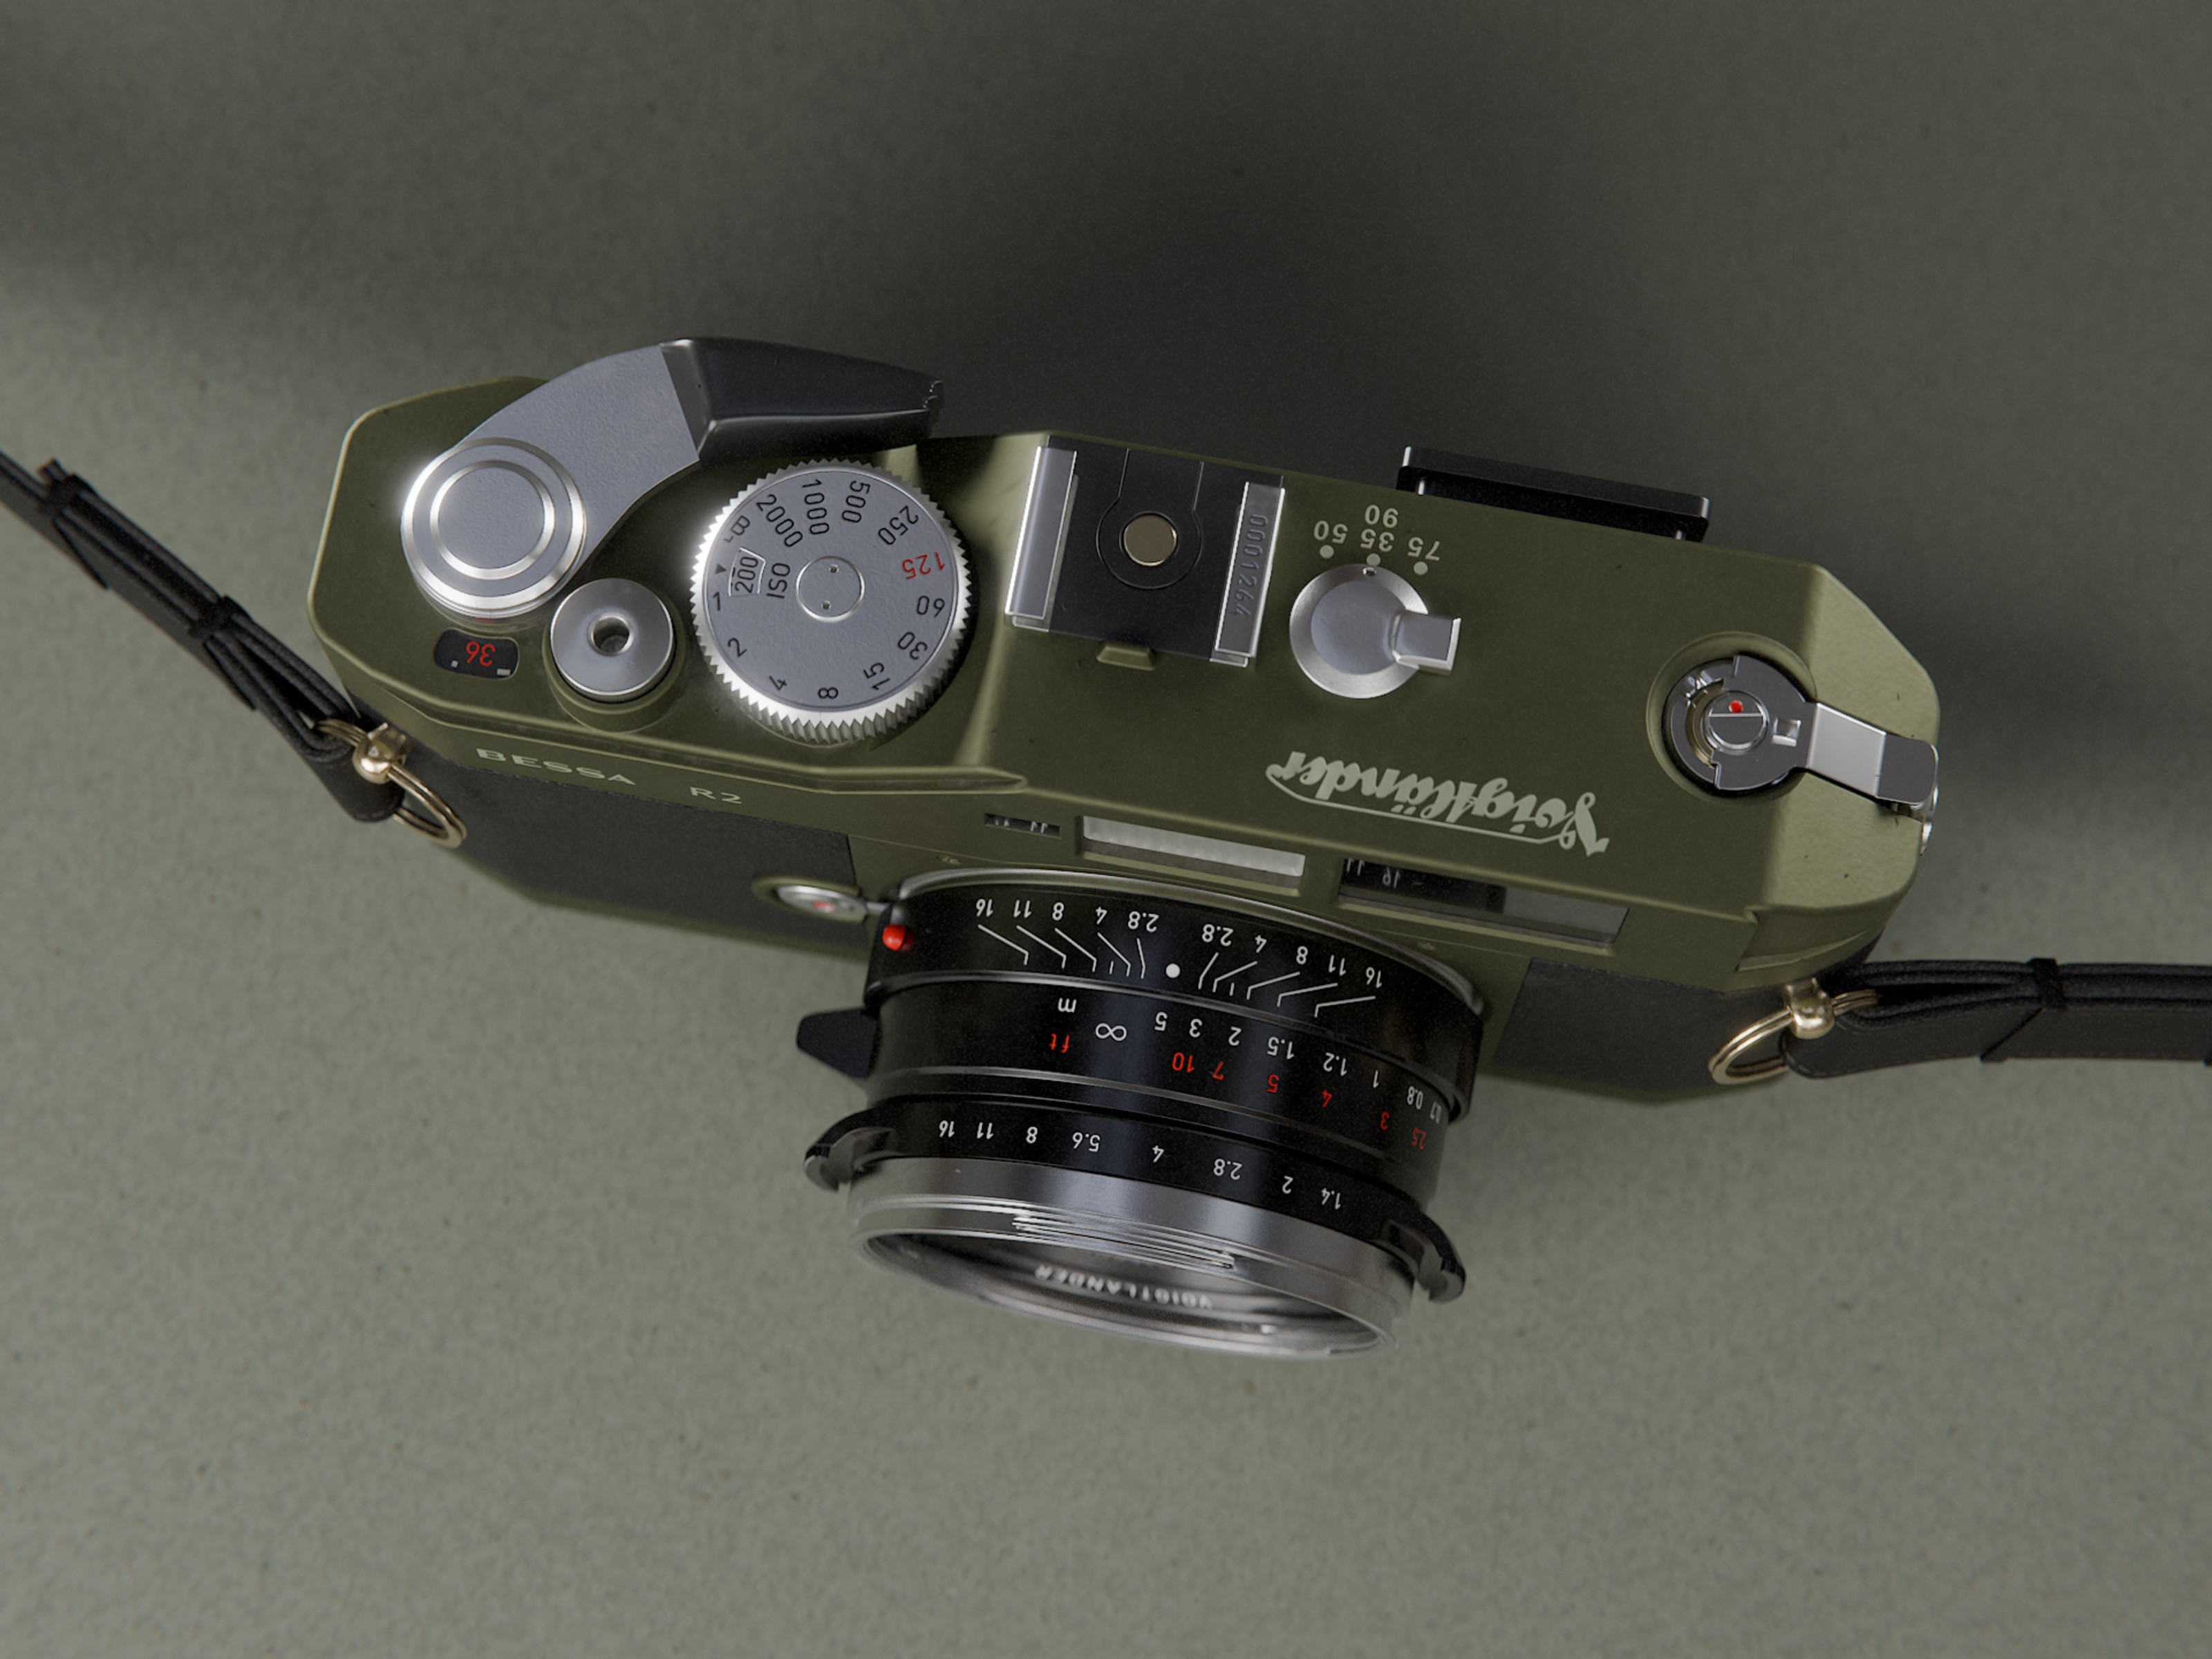 Render of the top of the camera.